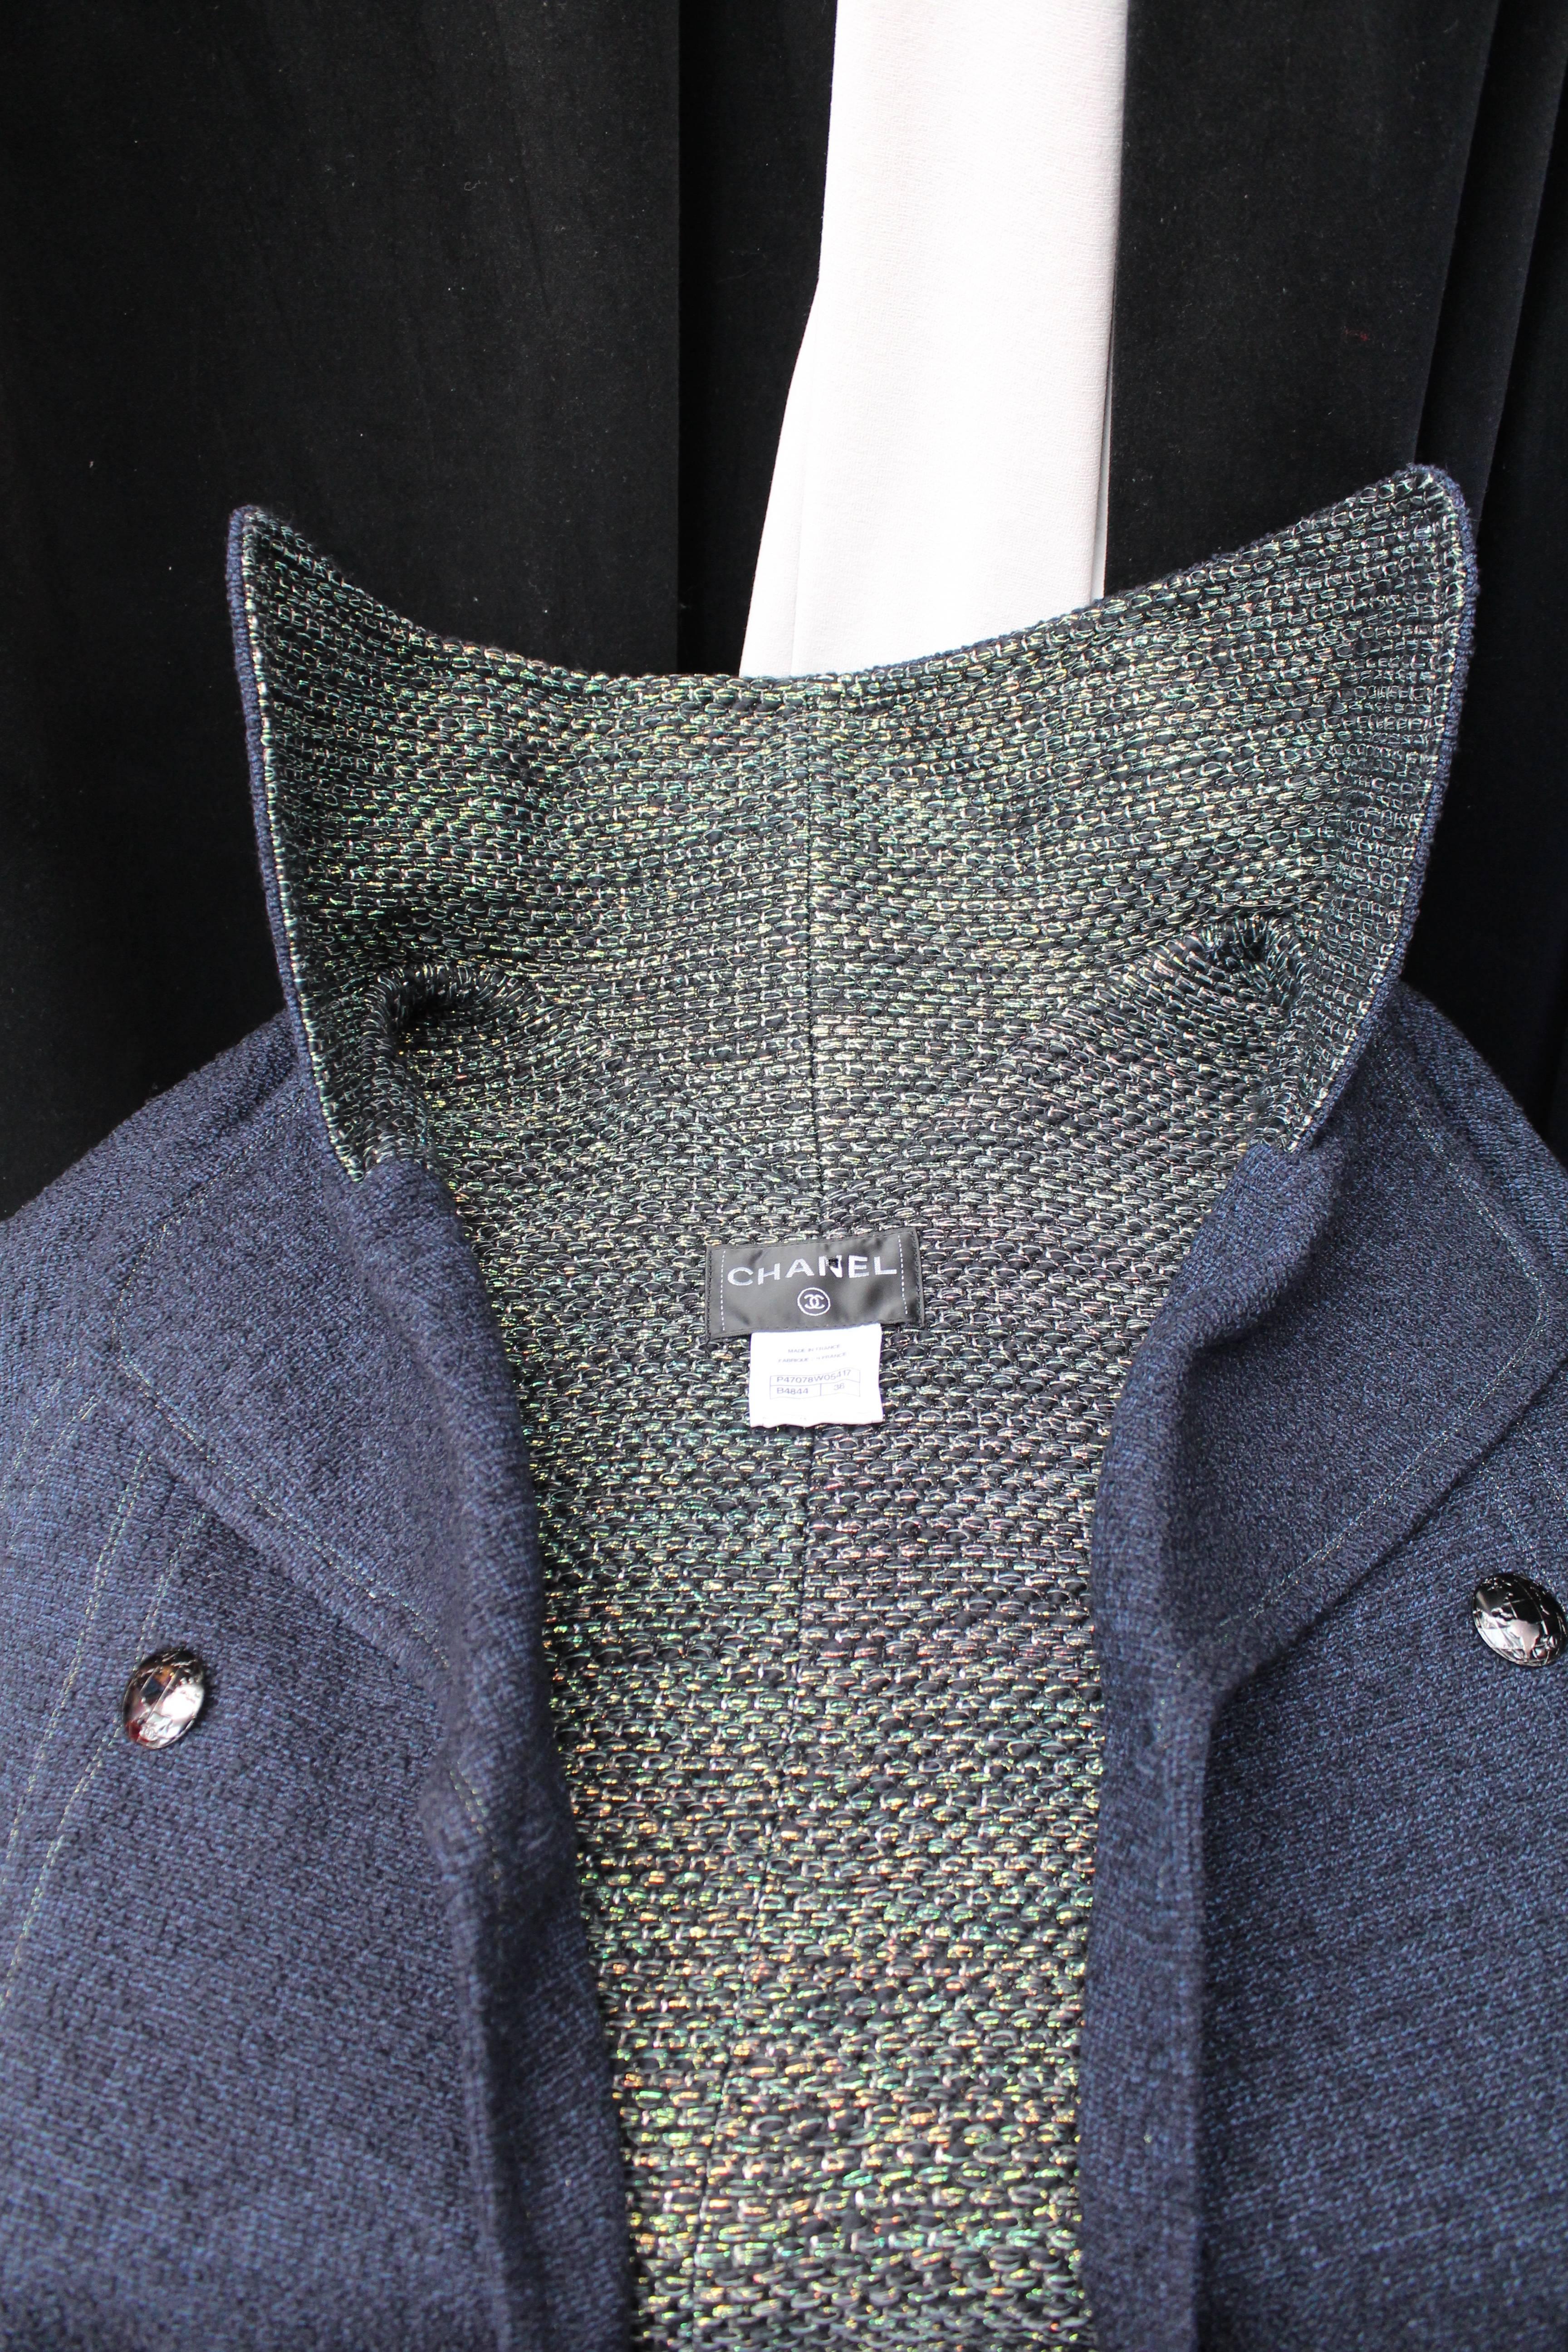 Fall 2013 Chanel Coat in Navy Blue and Iridescent Green Wool Tweed 2